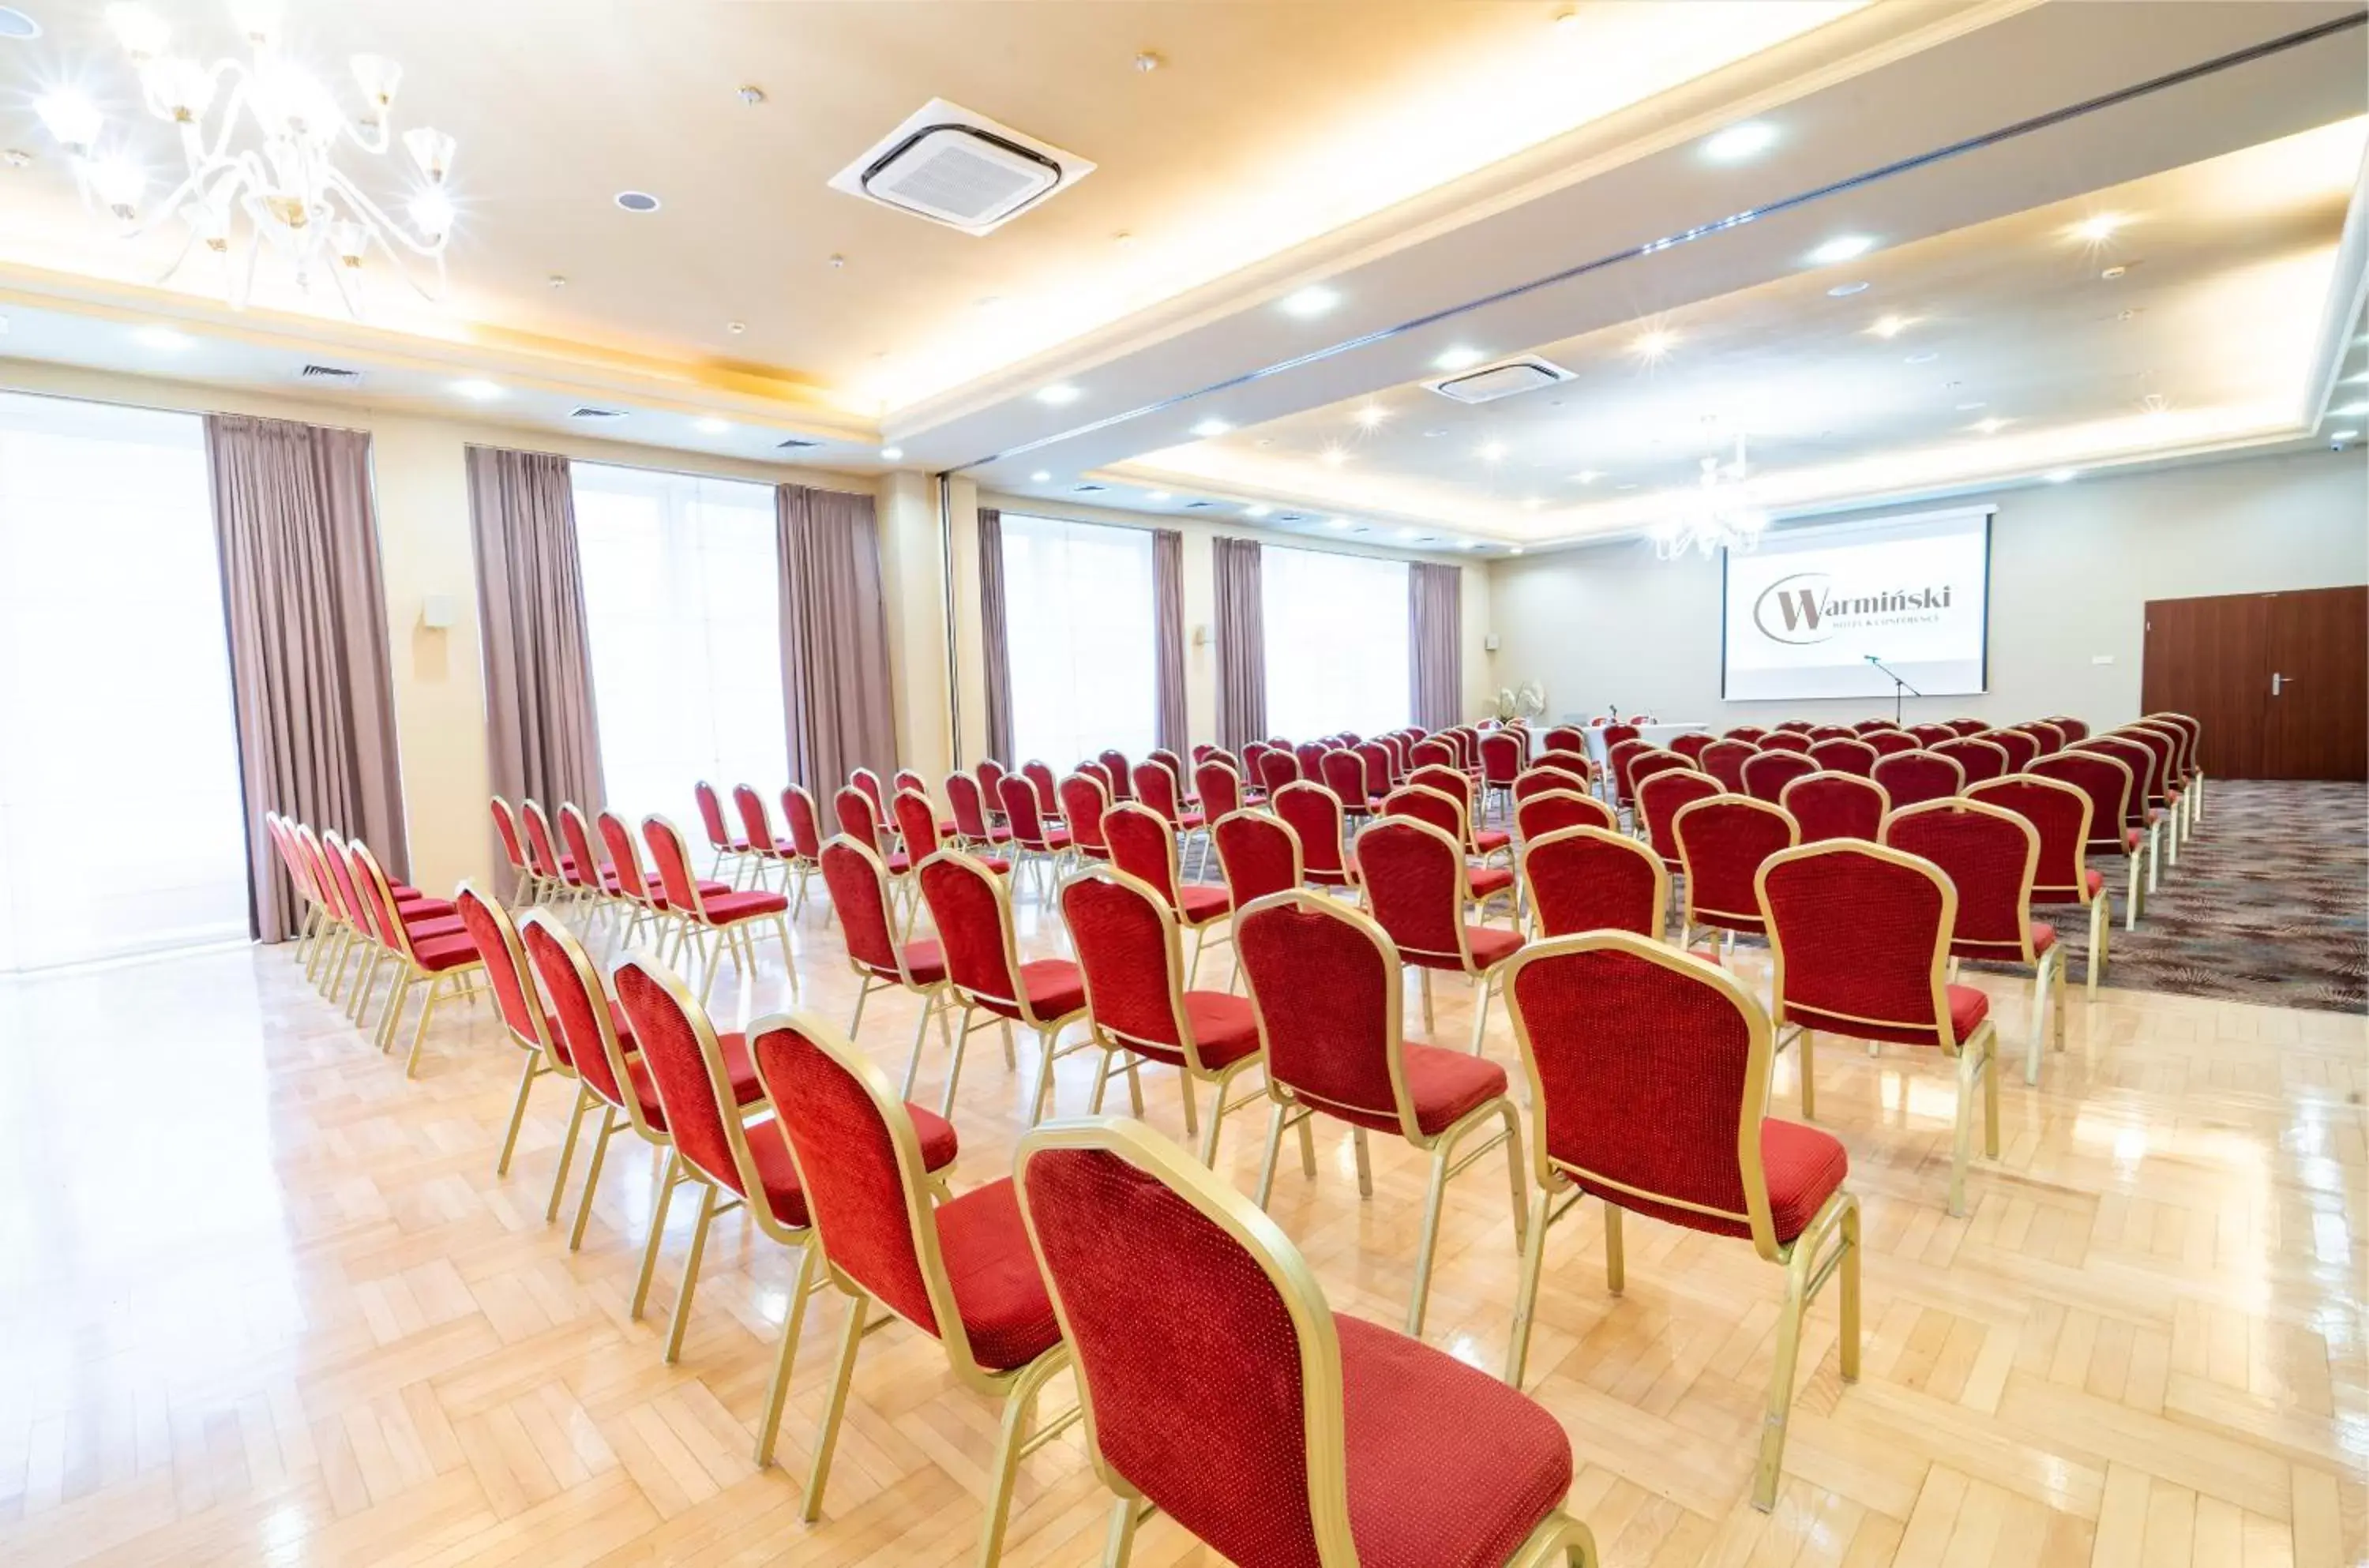 Meeting/conference room in Warmiński Hotel & Conference